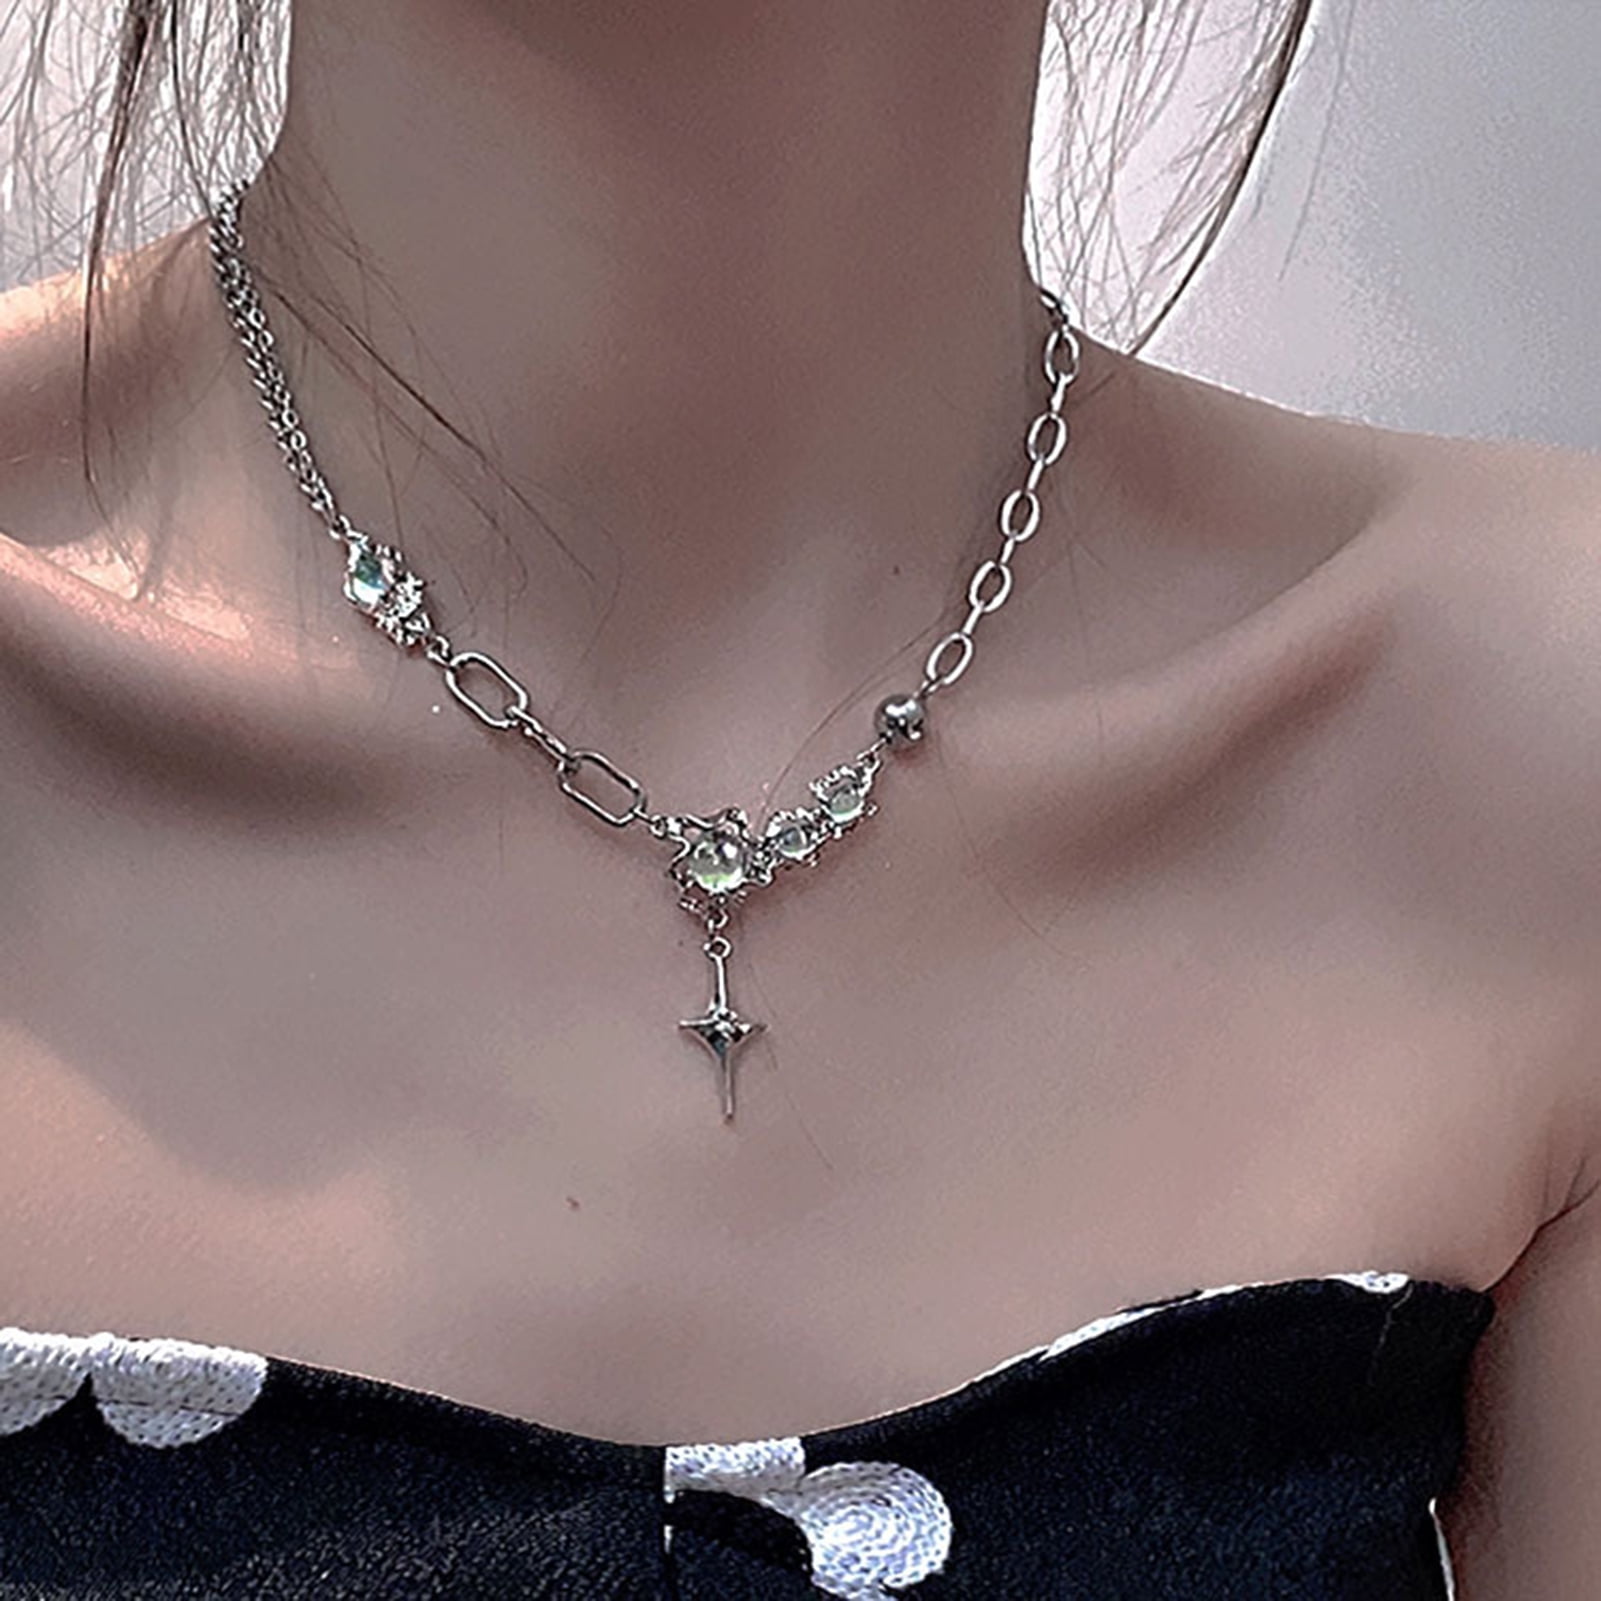 Buy 925 Sterling Silver Plain Thick Cross Pendant Necklace / Free Engraving  Service / Solid / Quality KIMNKIM Online in India - Etsy